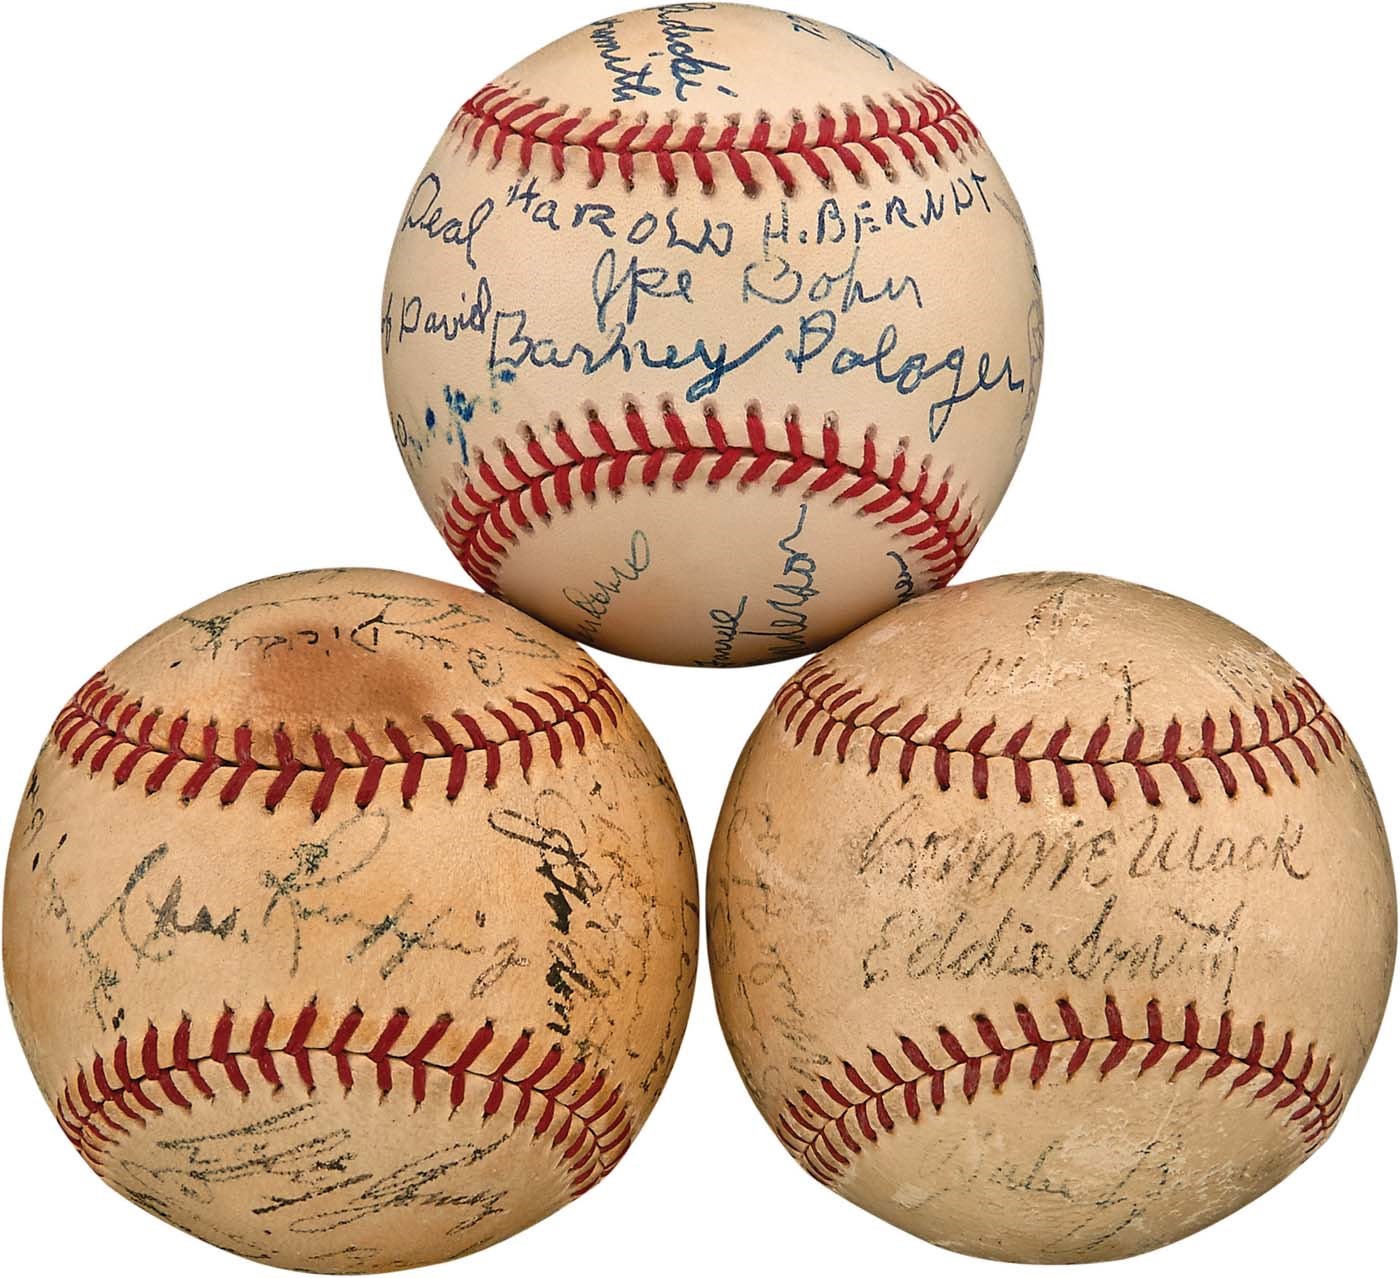 - Unique Signed Baseballs with 1941 Yankees & Connie Mack (3)